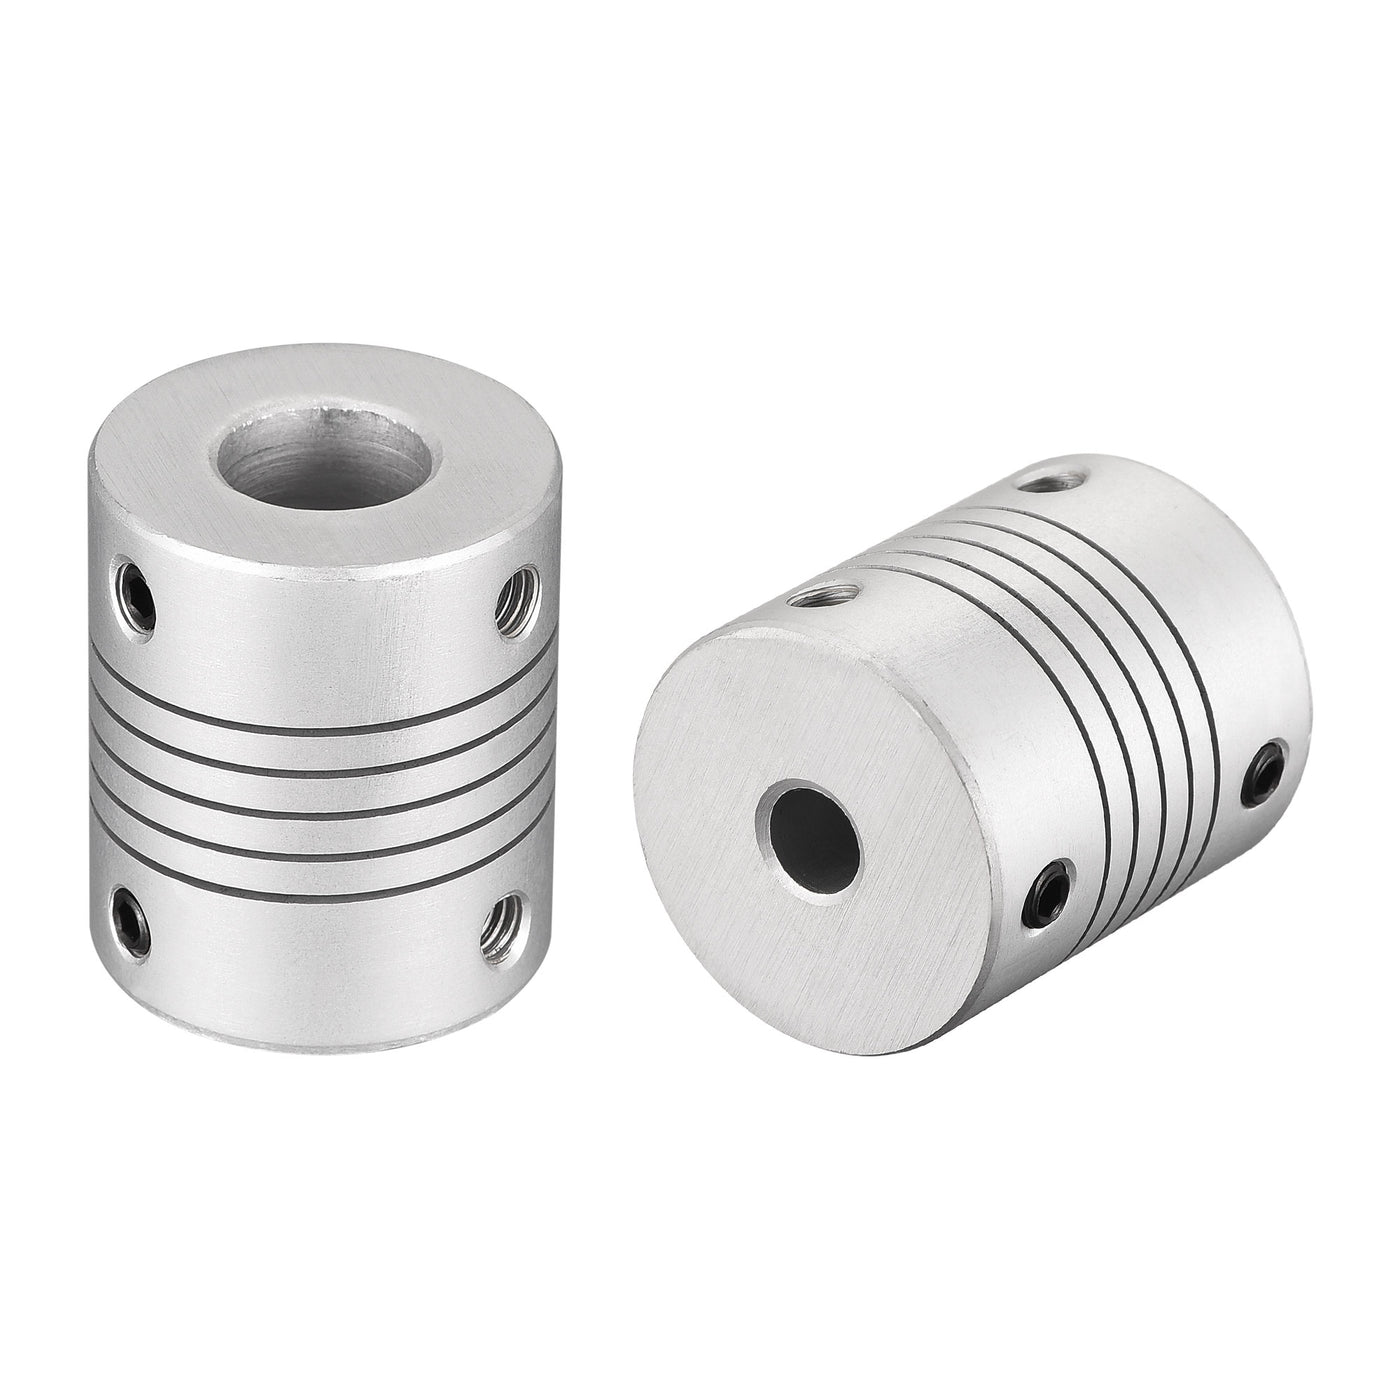 uxcell Uxcell 11mm to 6mm Aluminum Alloy Shaft Coupling Flexible Coupler L30xD25 Silver 2Pcs